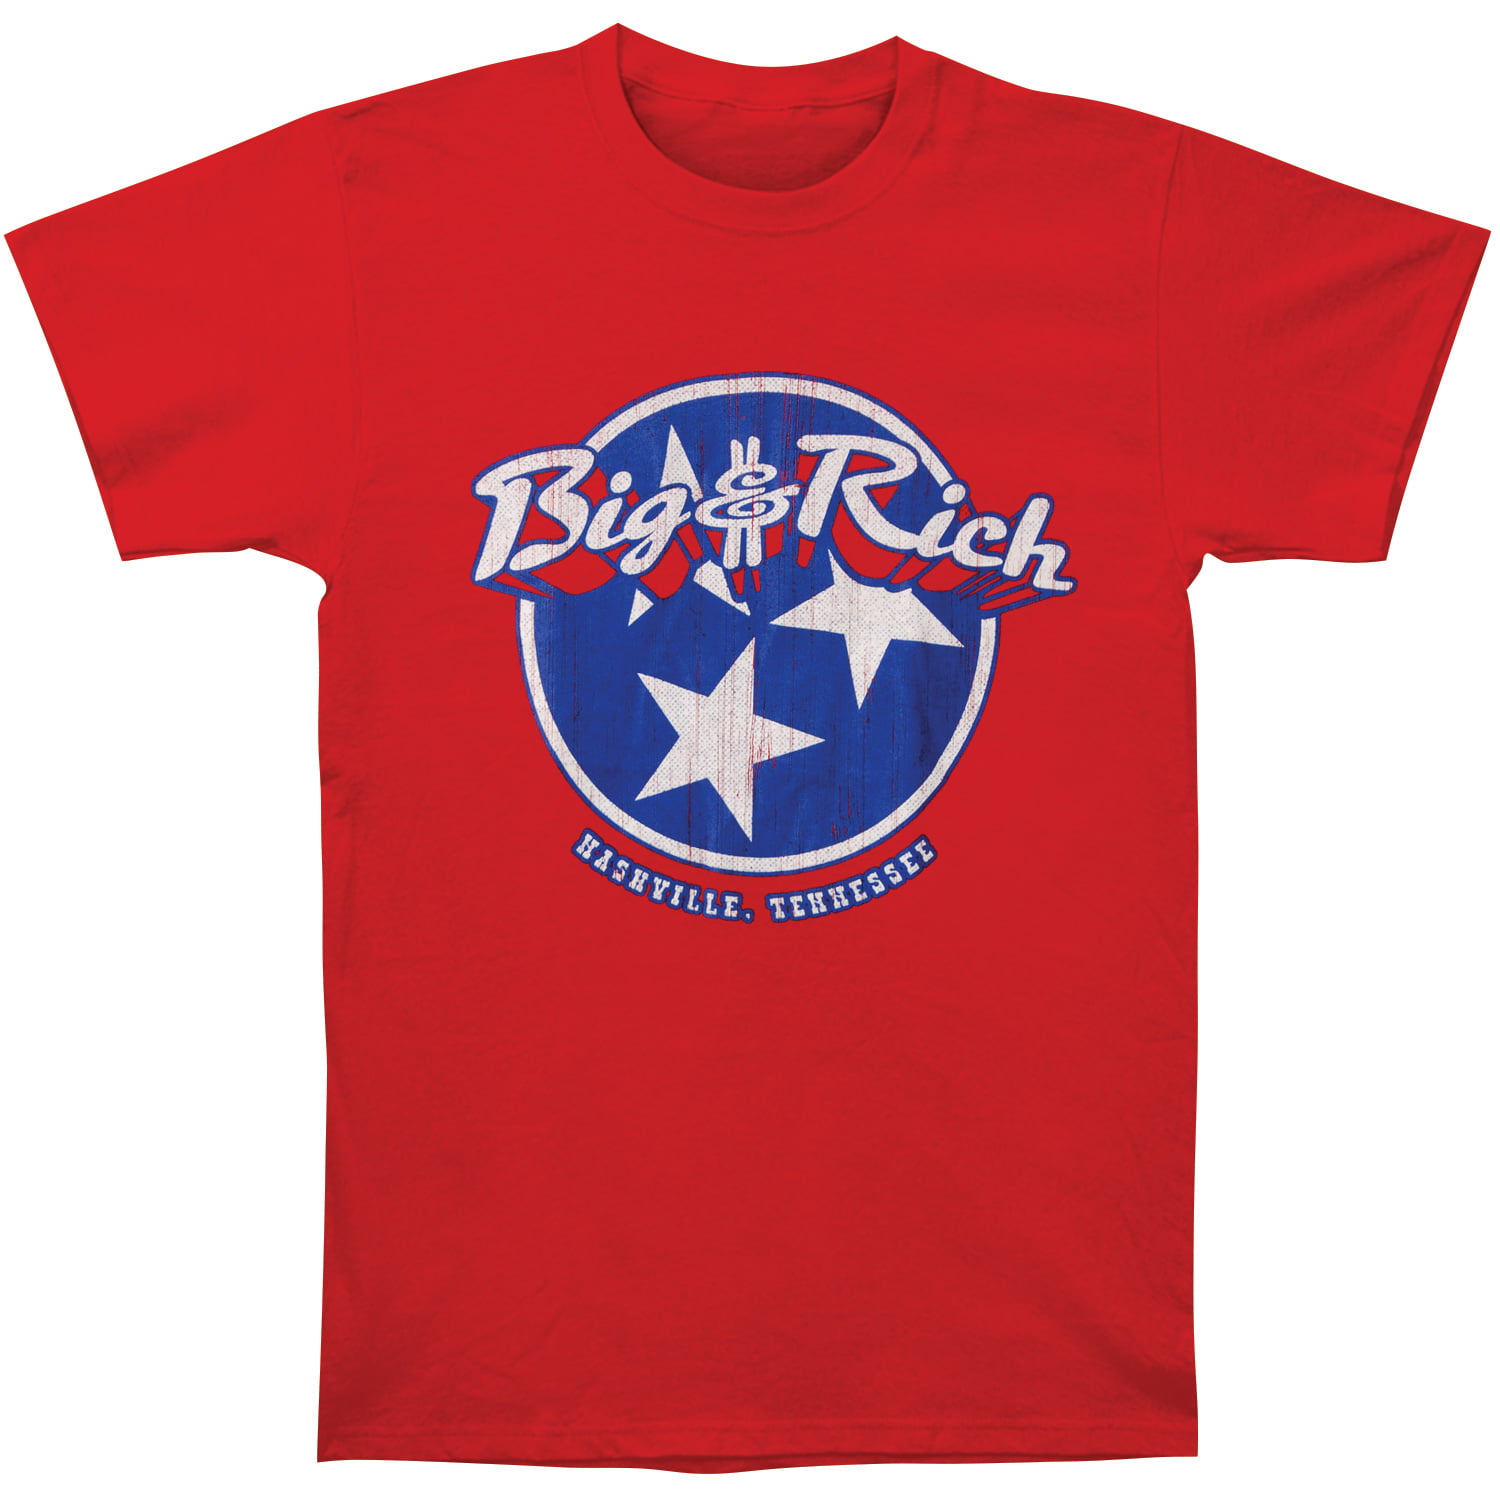 Big & Rich Save and Ride T-Shirt